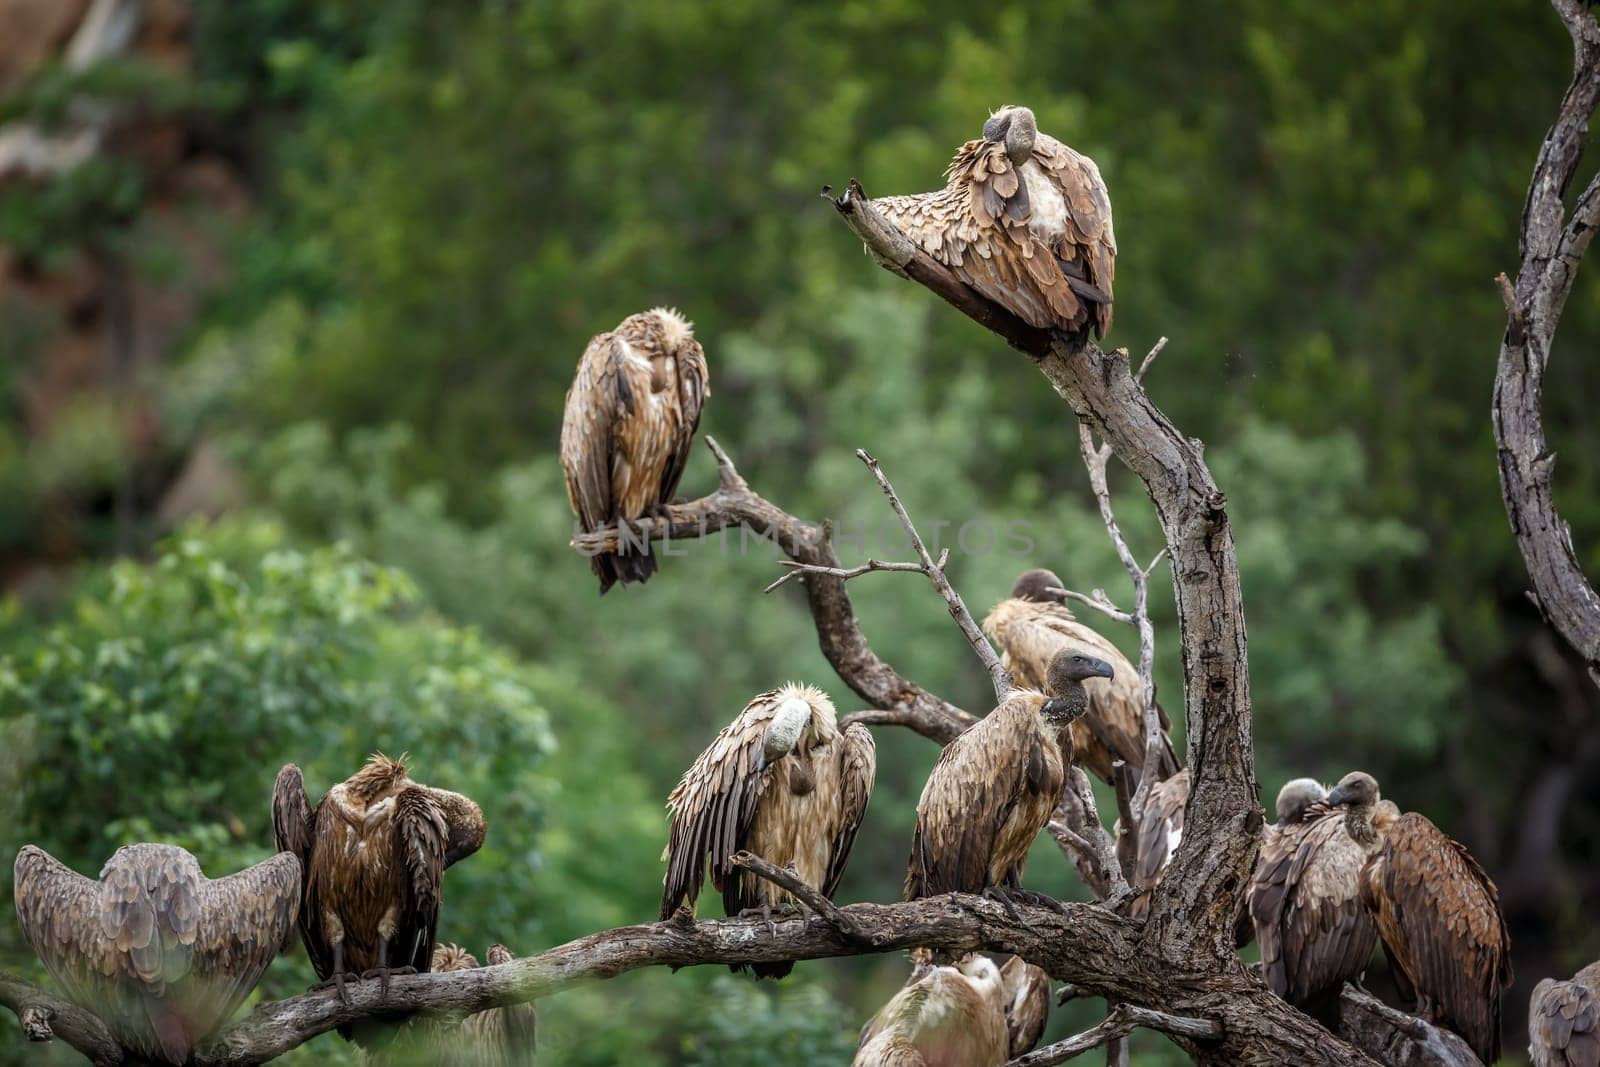 Group of White backed Vulture grooming in the morning in Kruger National park, South Africa ; Specie Gyps africanus family of Accipitridae